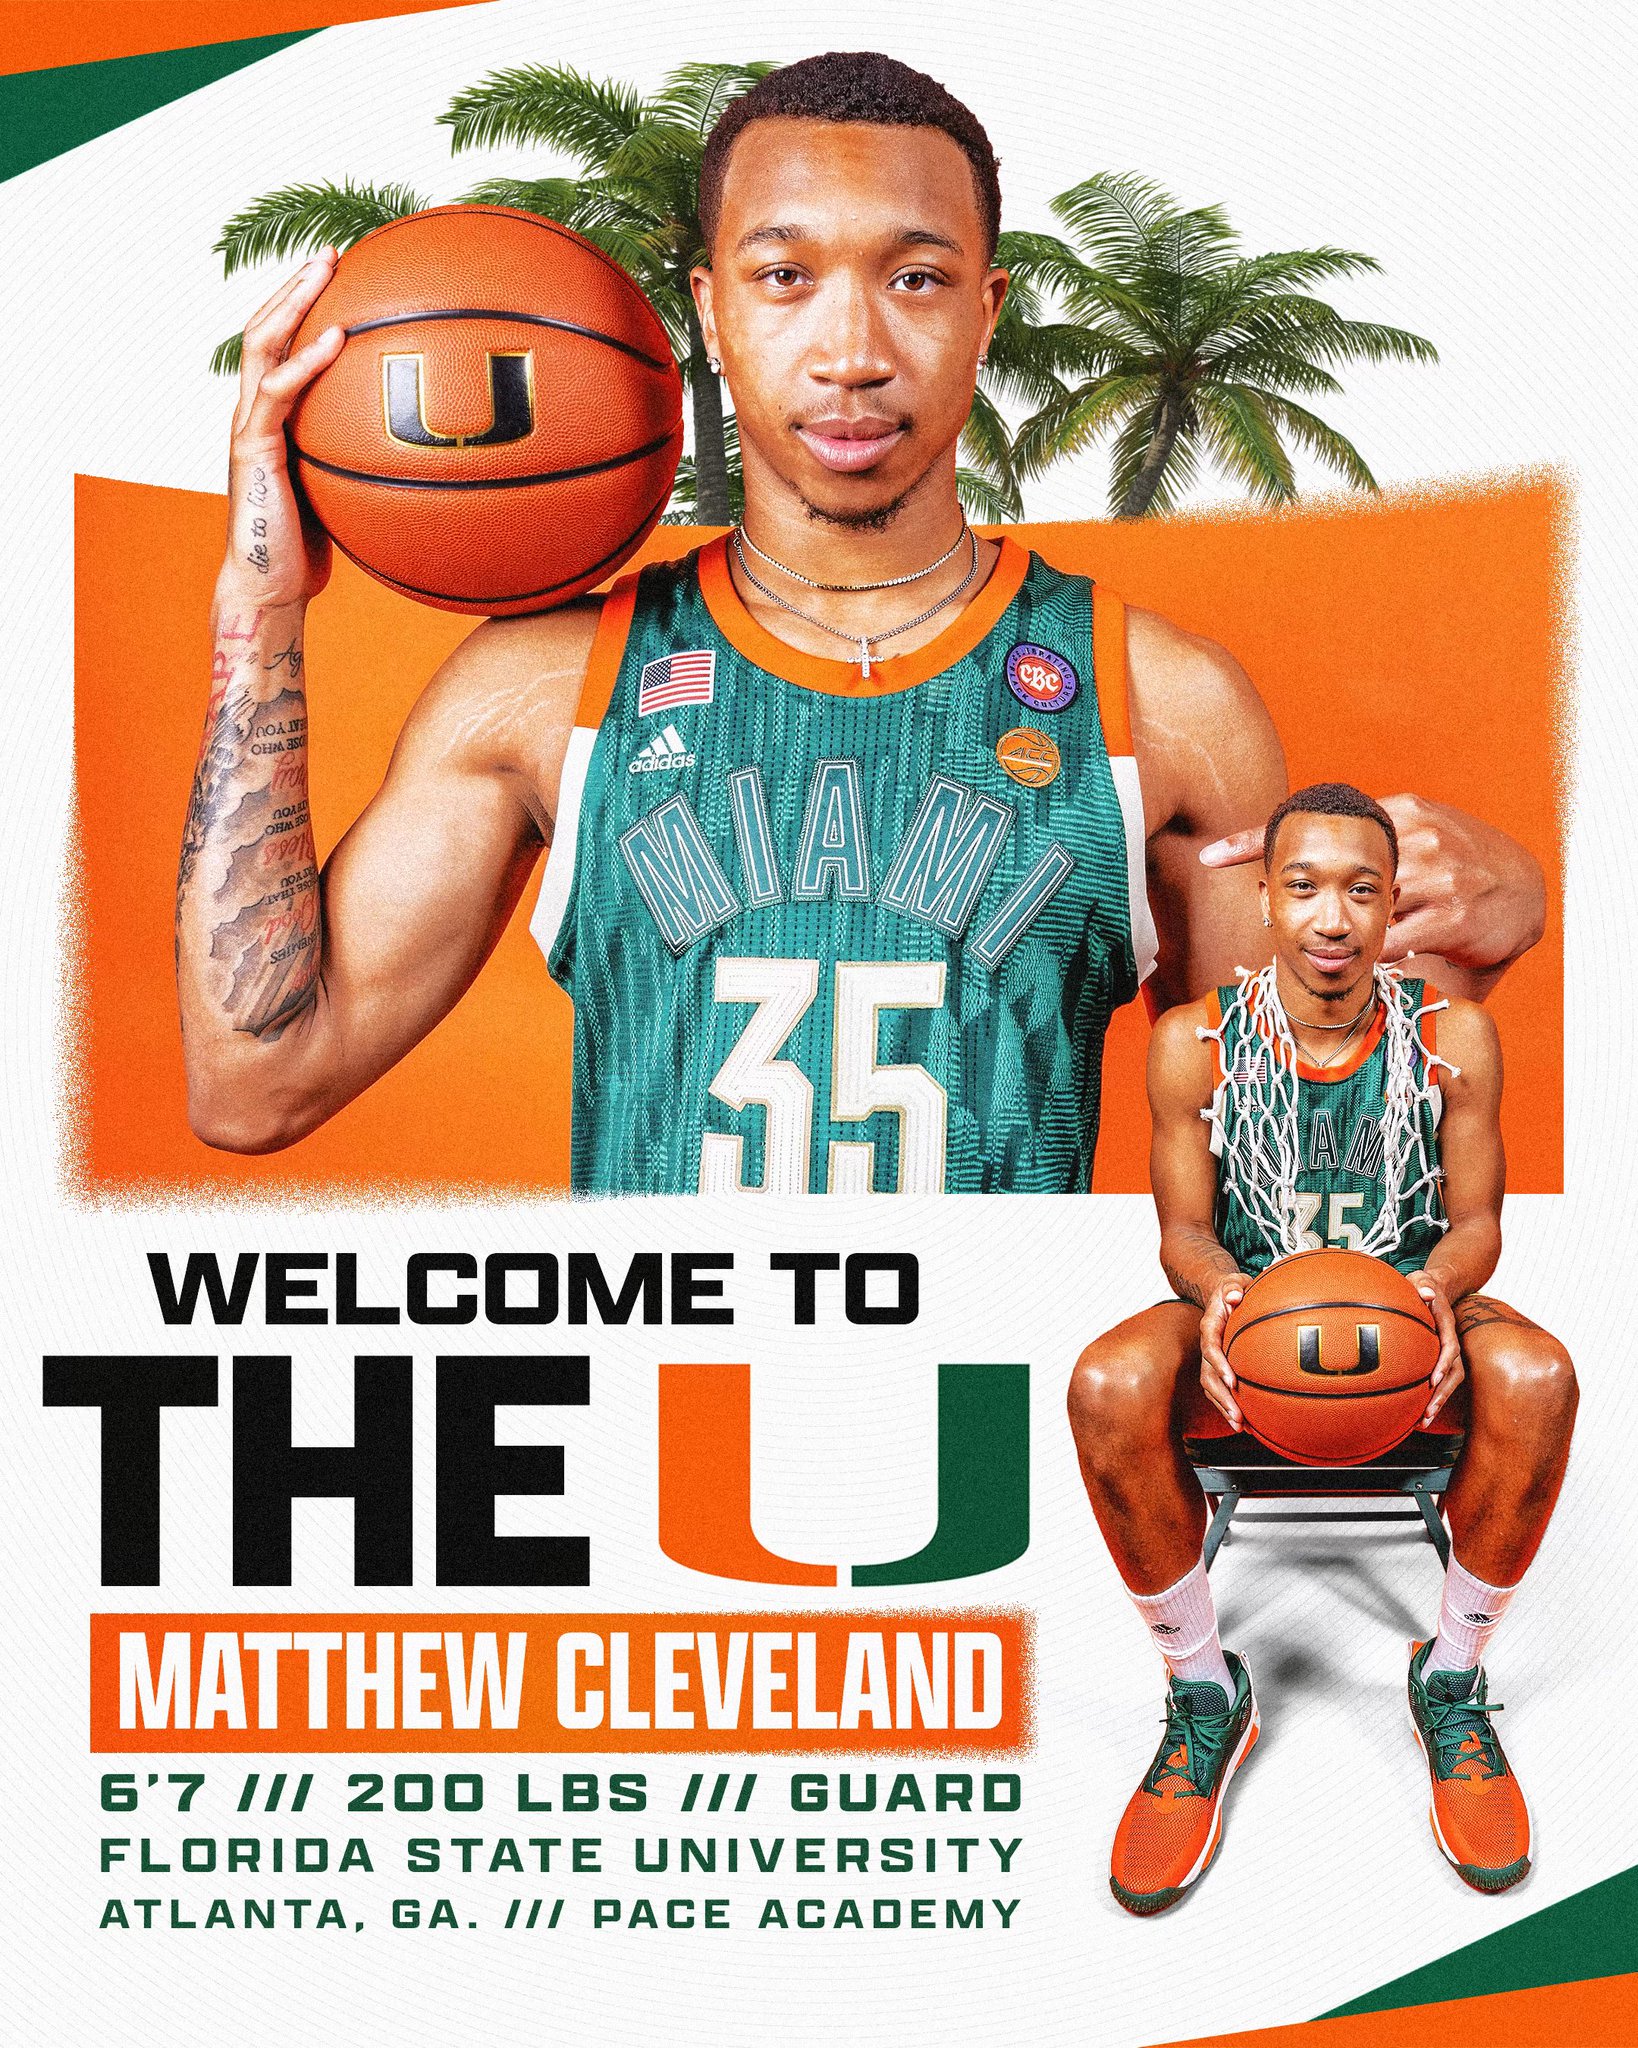 Canes Hoops: New Uni Alert - State of The U